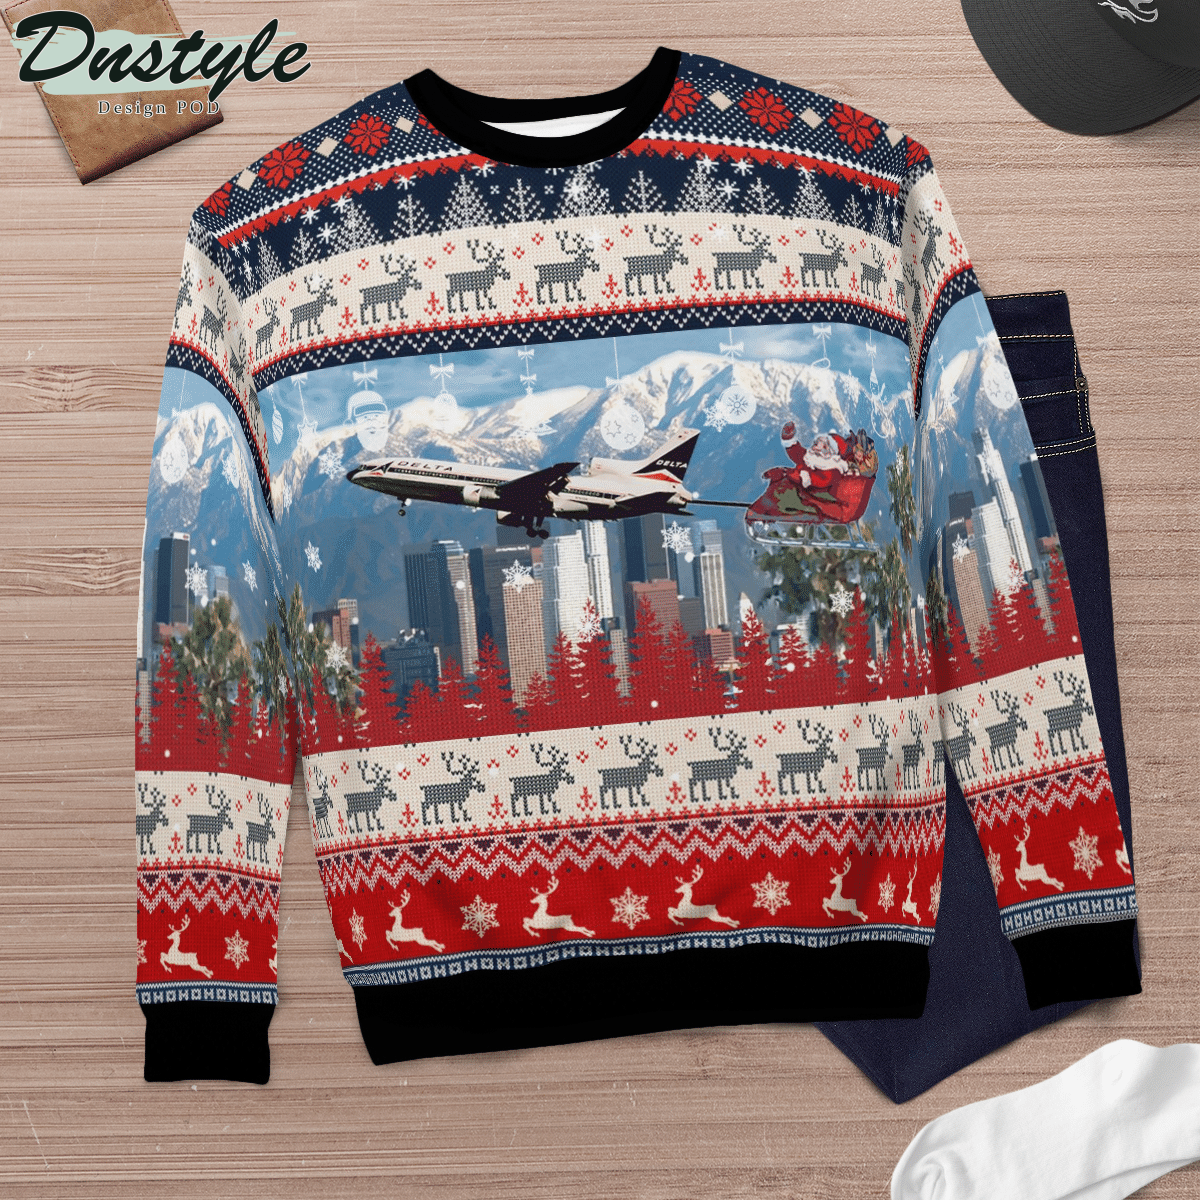 Delta Air Lines Lockheed L-1011-500 With Santa over Los Angeles Ugly Christmas Sweater